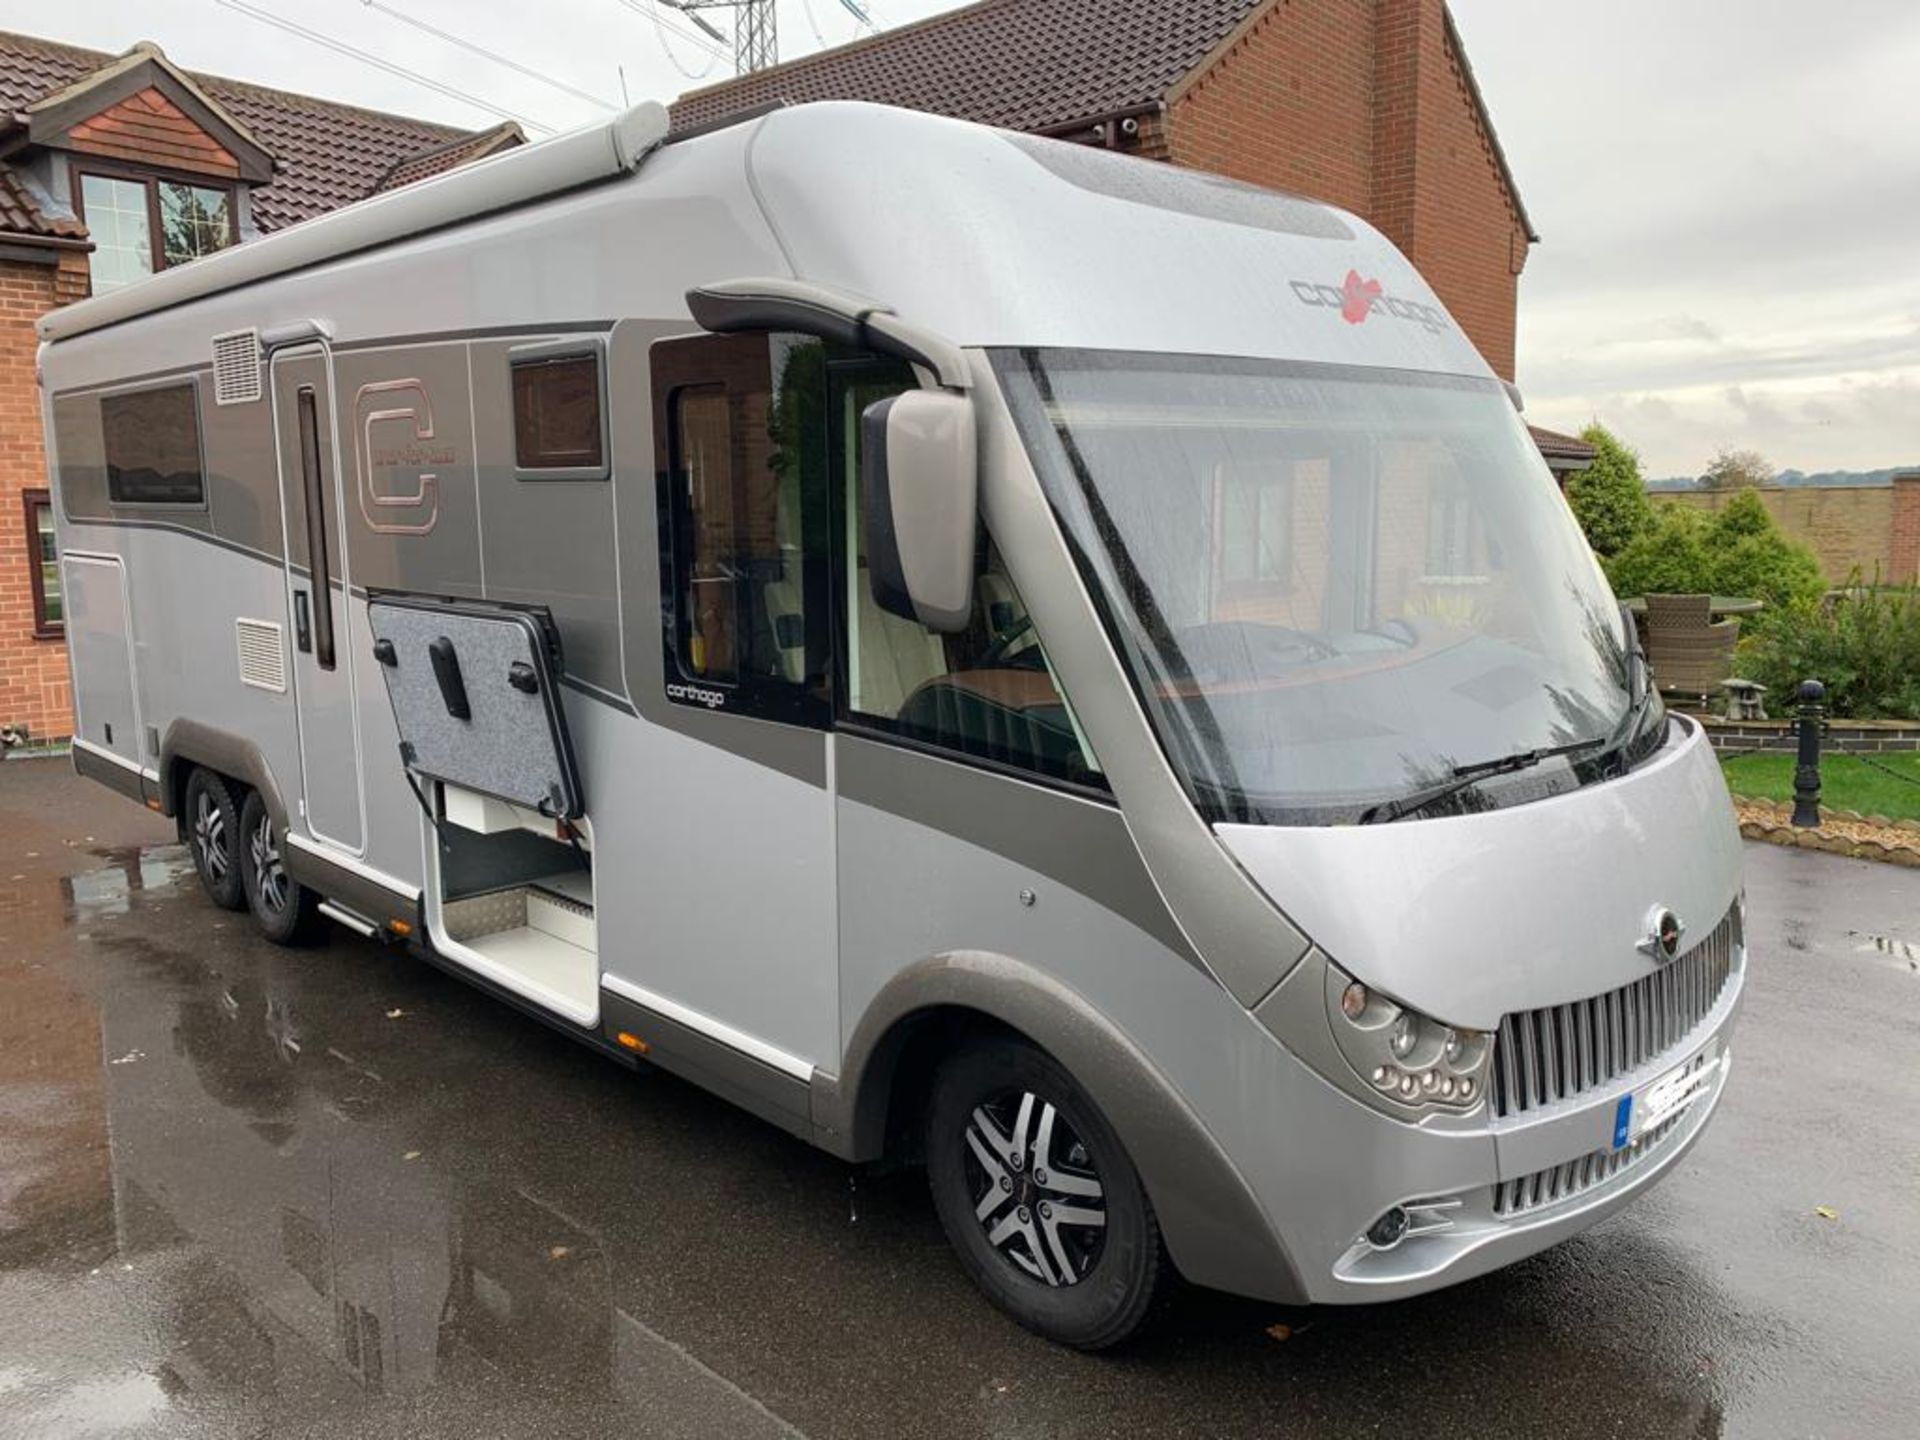 2020 CARTHAGO LINER-FOR-TWO 53L MOTORHOME 11 mths WARRANTY 4529 MILES, MINT CONDITION NO VAT - Image 6 of 38